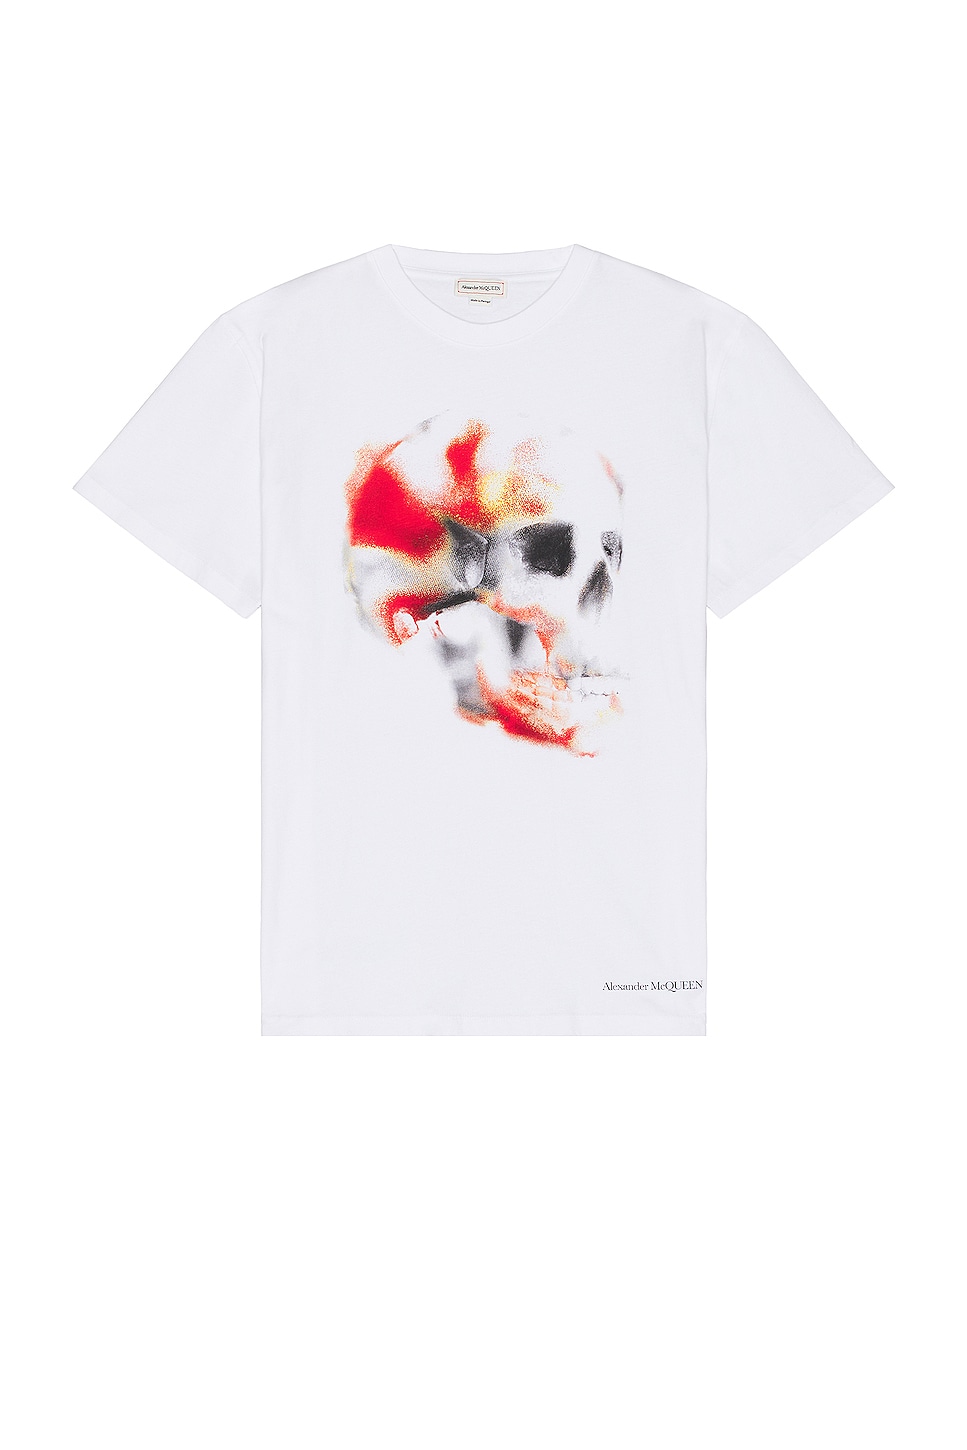 Image 1 of Alexander McQueen Obscured Skull Print T-shirt in White, Red, & Black